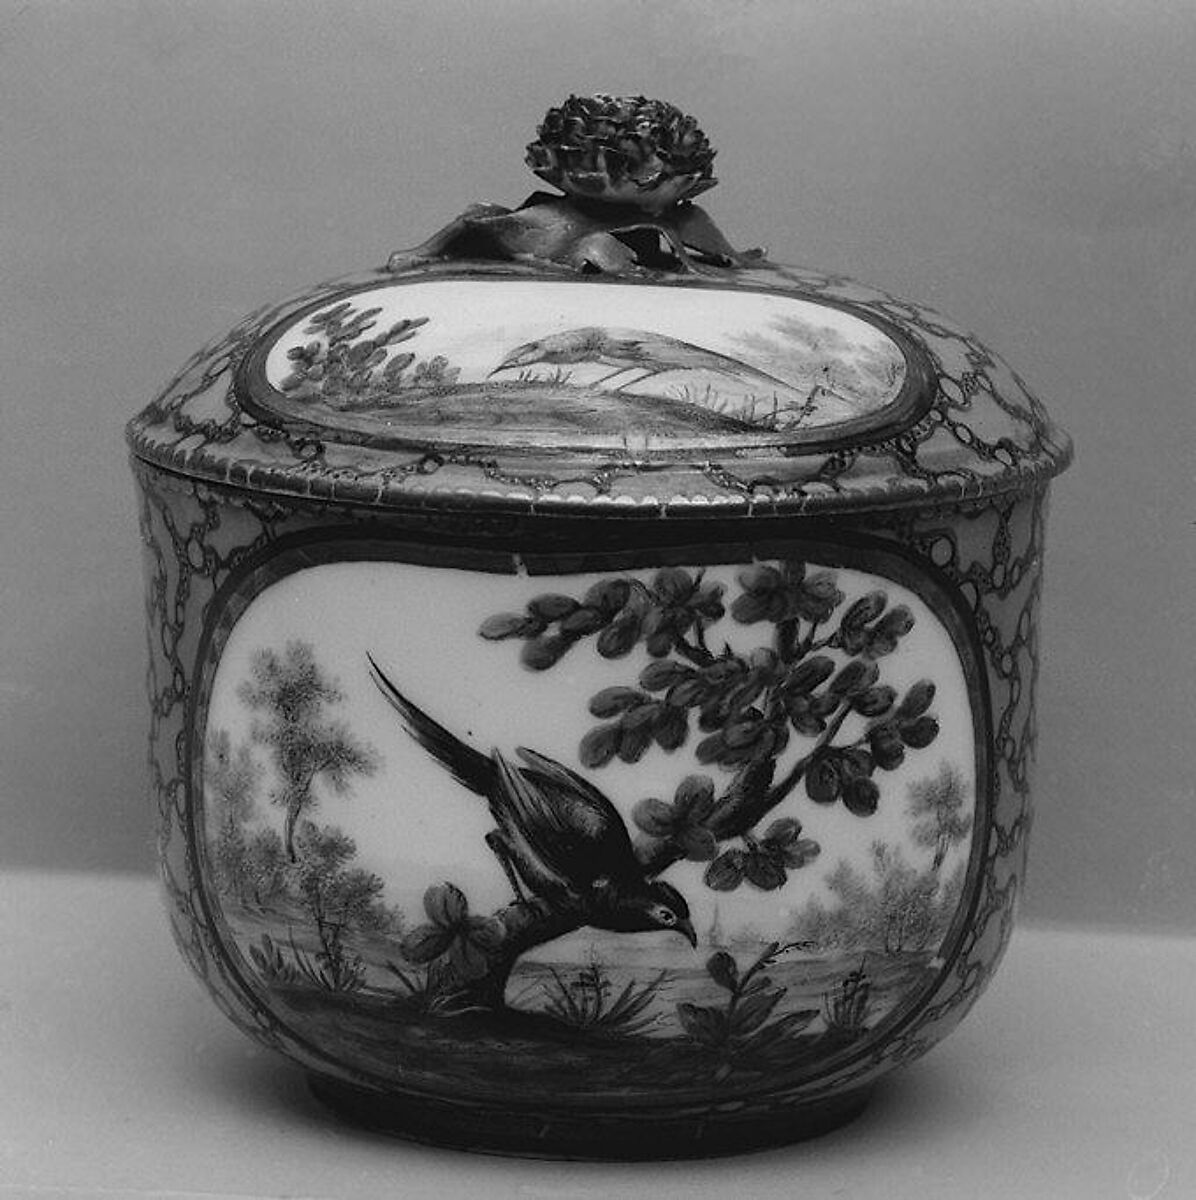 Sugar bowl, possibly Sèvres Manufactory (French, 1740–present), Soft-paste porcelain, French, possibly Sèvres 